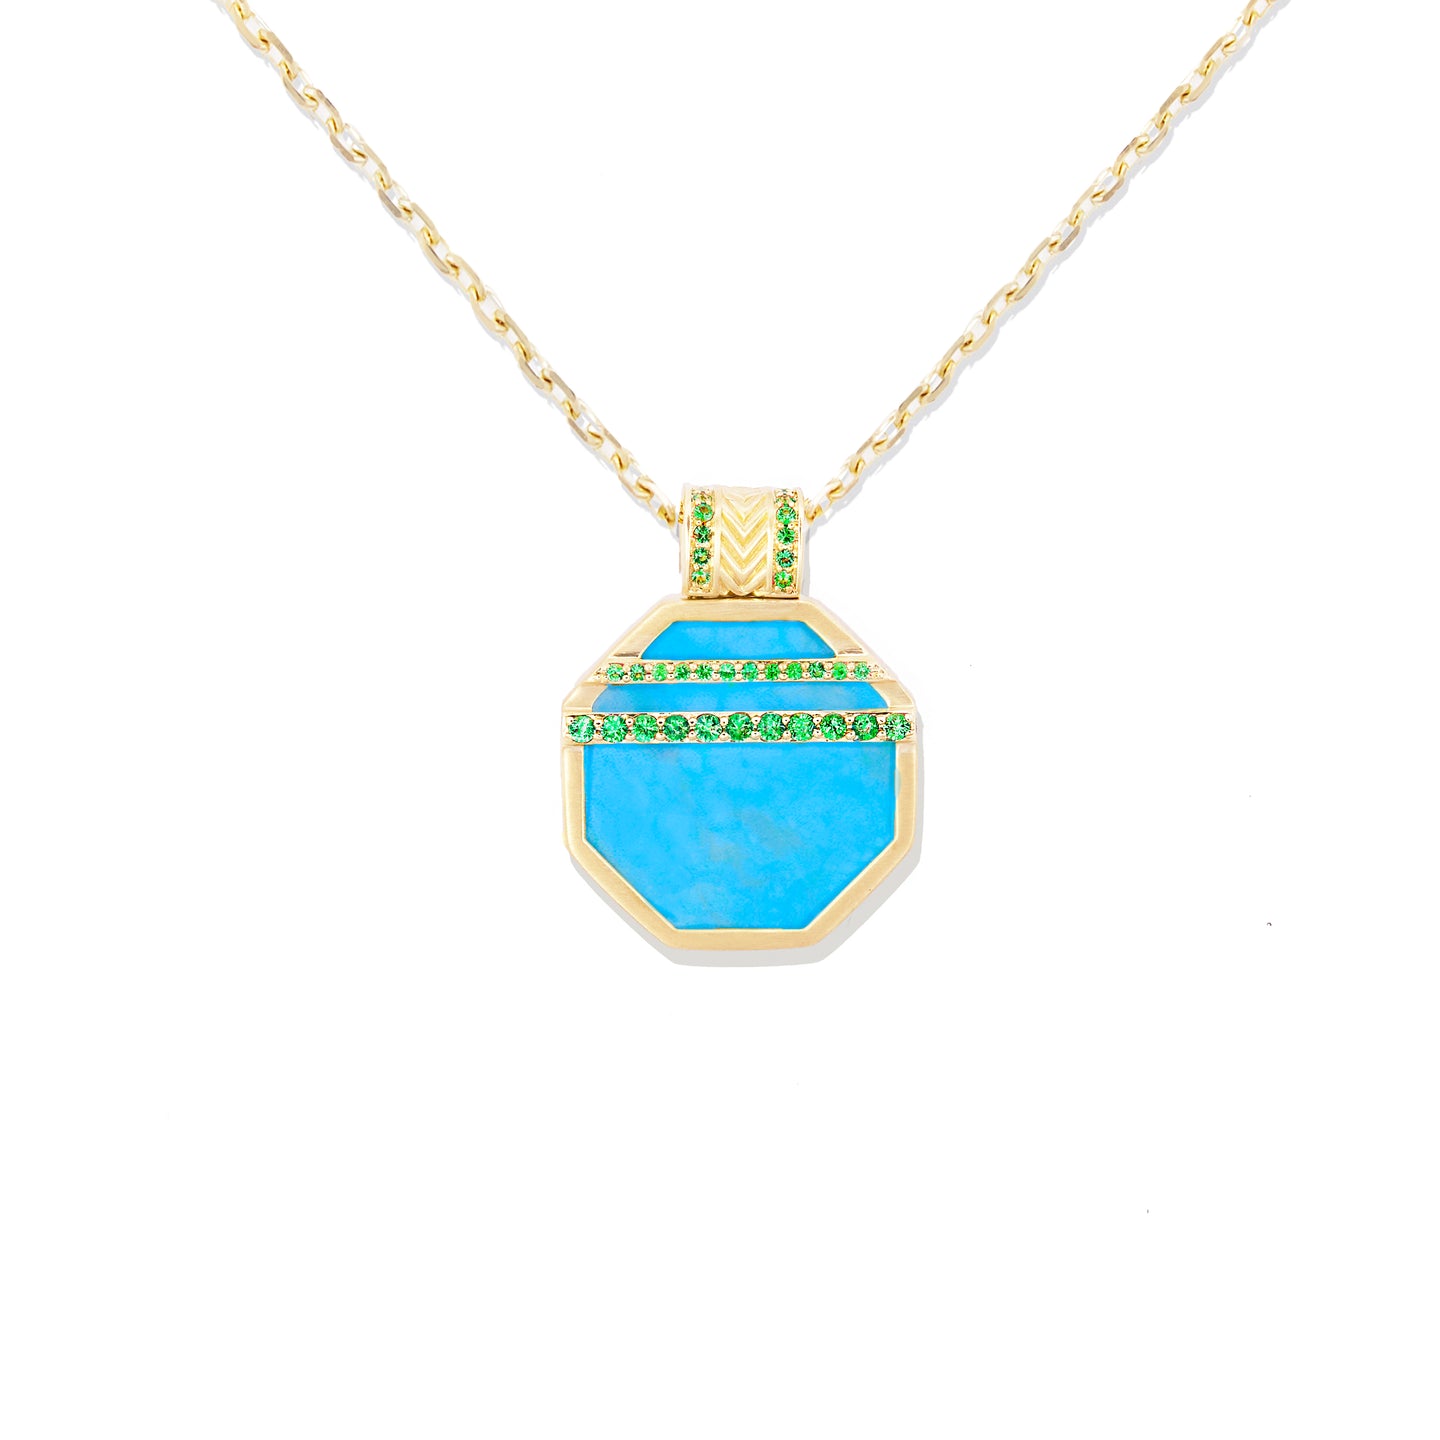 Spark Octagon Pendant Necklace - Turquoise & Emerald